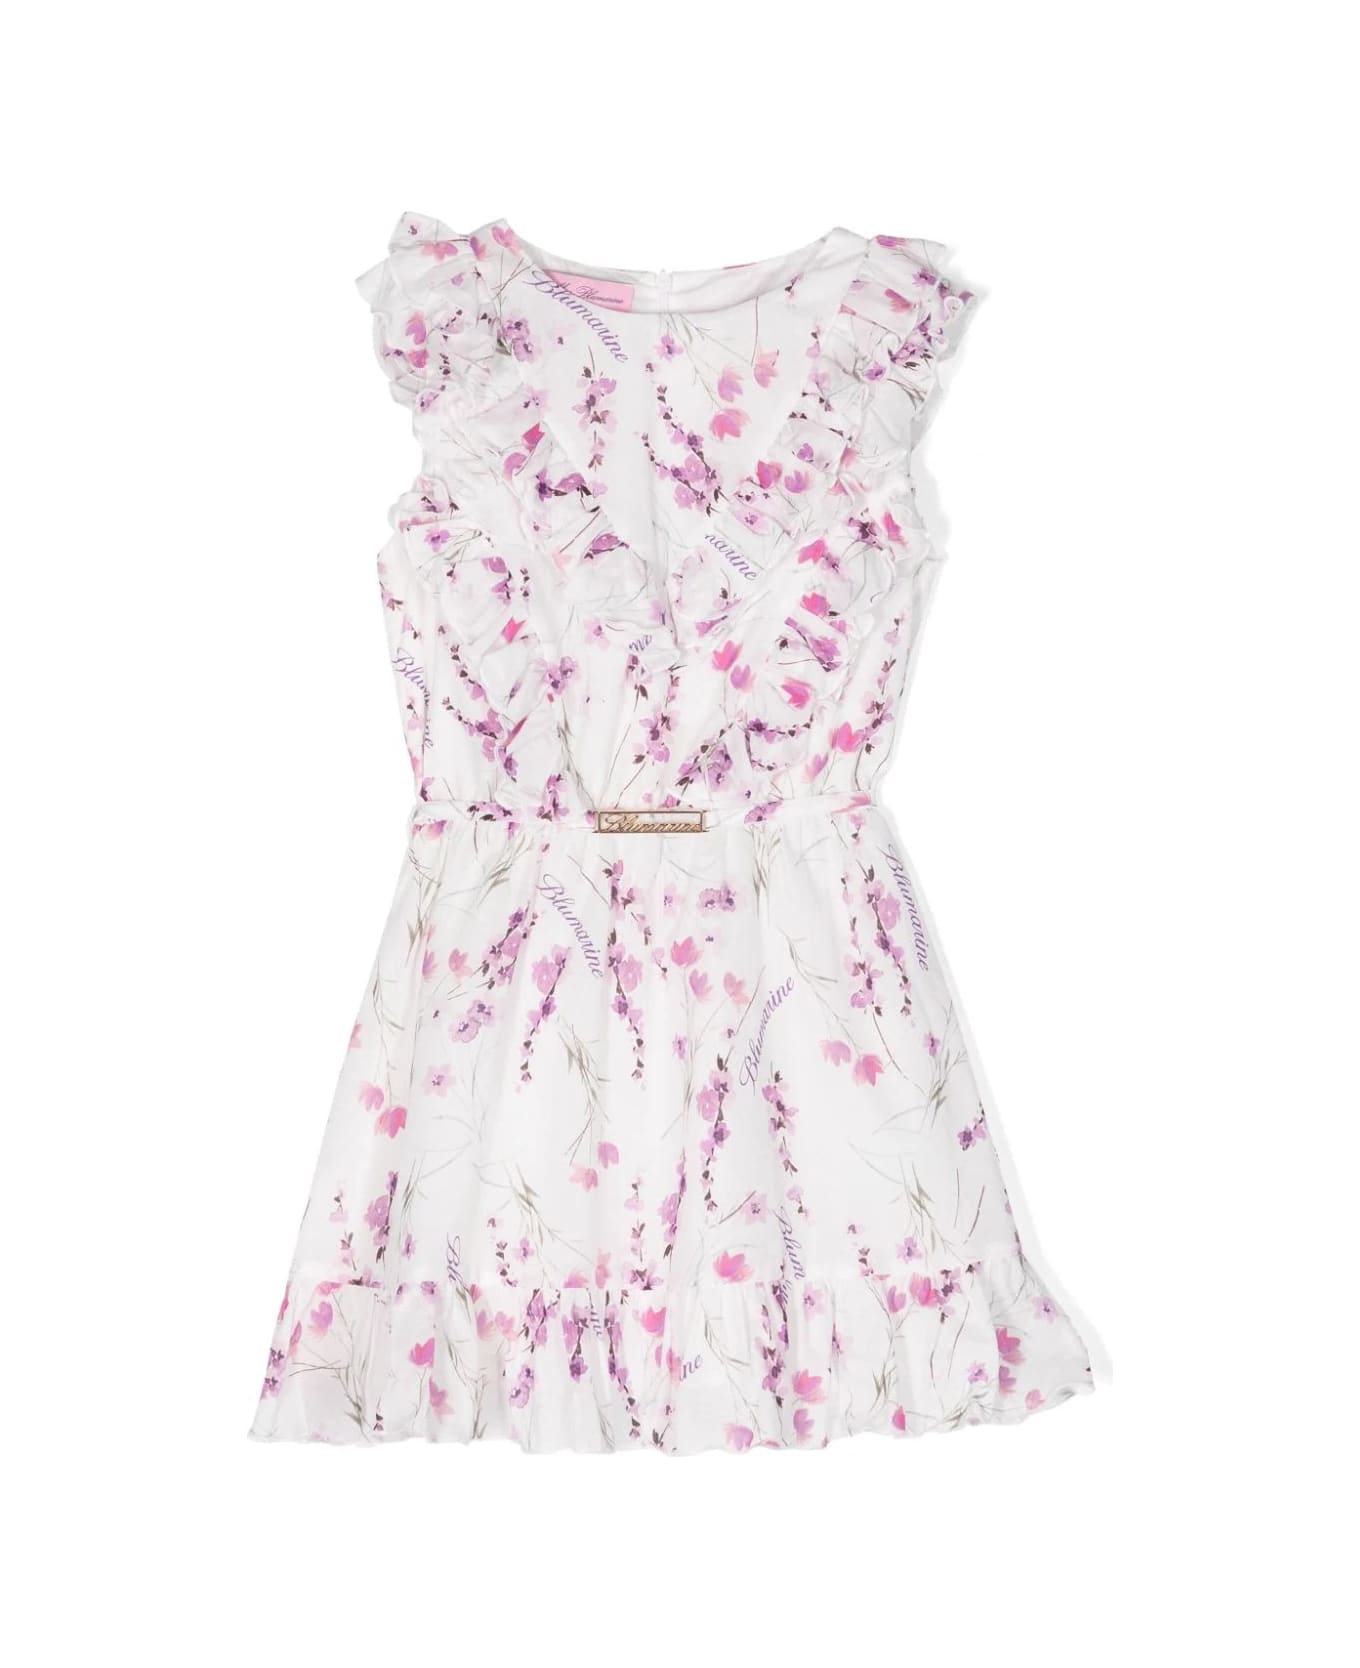 Miss Blumarine White Dress With Ruffles And Floral Print - White